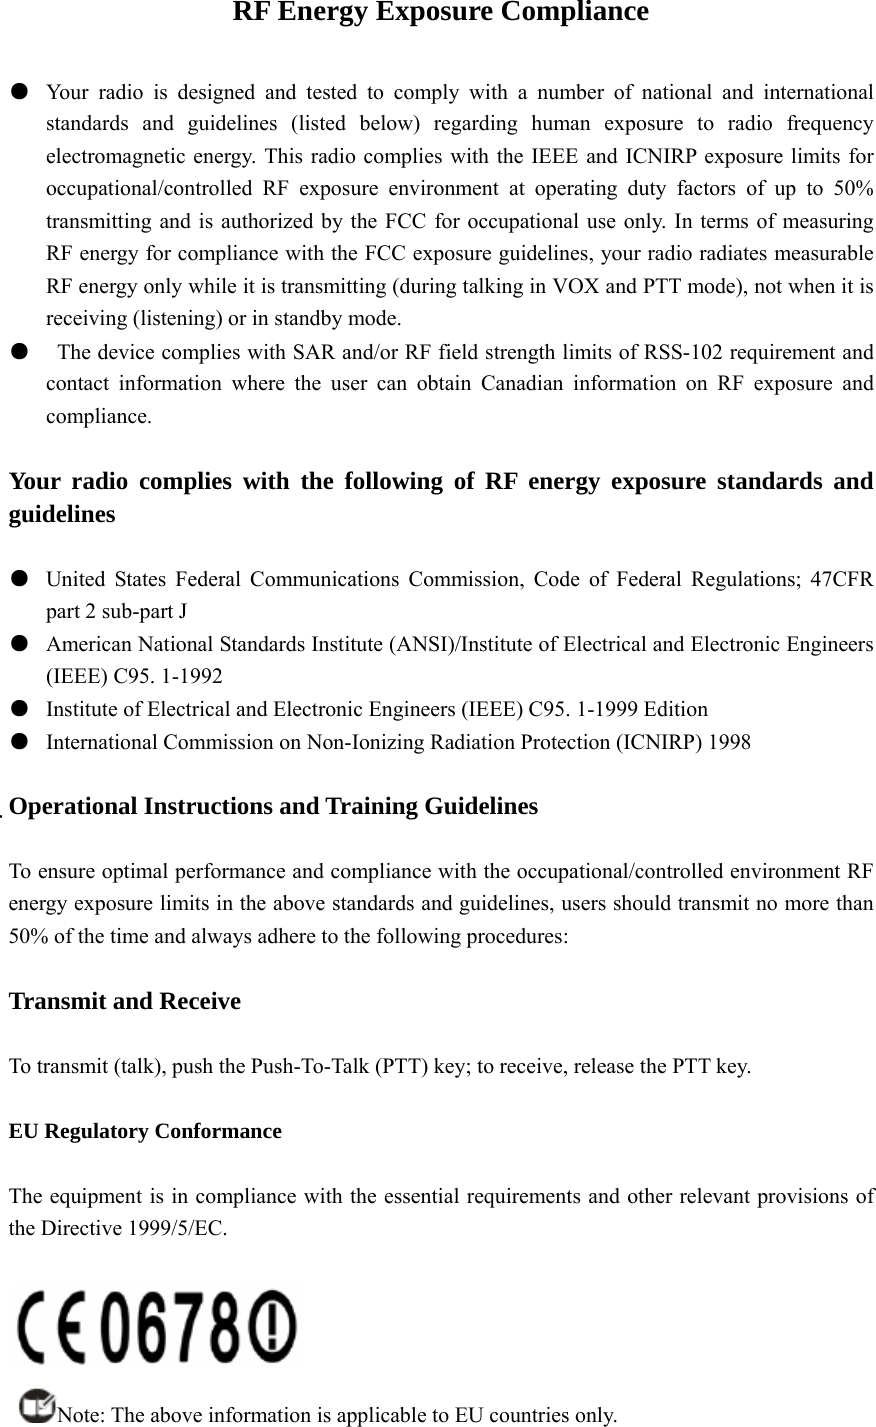 RF Energy Exposure Compliance  ●  Your radio is designed and tested to comply with a number of national and international standards and guidelines (listed below) regarding human exposure to radio frequency electromagnetic energy. This radio complies with the IEEE and ICNIRP exposure limits for occupational/controlled RF exposure environment at operating duty factors of up to 50% transmitting and is authorized by the FCC for occupational use only. In terms of measuring RF energy for compliance with the FCC exposure guidelines, your radio radiates measurable RF energy only while it is transmitting (during talking in VOX and PTT mode), not when it is receiving (listening) or in standby mode. ●    The device complies with SAR and/or RF field strength limits of RSS-102 requirement and contact information where the user can obtain Canadian information on RF exposure and compliance.  Your radio complies with the following of RF energy exposure standards and guidelines  ●  United States Federal Communications Commission, Code of Federal Regulations; 47CFR part 2 sub-part J ●  American National Standards Institute (ANSI)/Institute of Electrical and Electronic Engineers (IEEE) C95. 1-1992 ●  Institute of Electrical and Electronic Engineers (IEEE) C95. 1-1999 Edition ●  International Commission on Non-Ionizing Radiation Protection (ICNIRP) 1998  Operational Instructions and Training Guidelines  To ensure optimal performance and compliance with the occupational/controlled environment RF energy exposure limits in the above standards and guidelines, users should transmit no more than 50% of the time and always adhere to the following procedures:  Transmit and Receive  To transmit (talk), push the Push-To-Talk (PTT) key; to receive, release the PTT key.  EU Regulatory Conformance  The equipment is in compliance with the essential requirements and other relevant provisions of the Directive 1999/5/EC.   Note: The above information is applicable to EU countries only. 